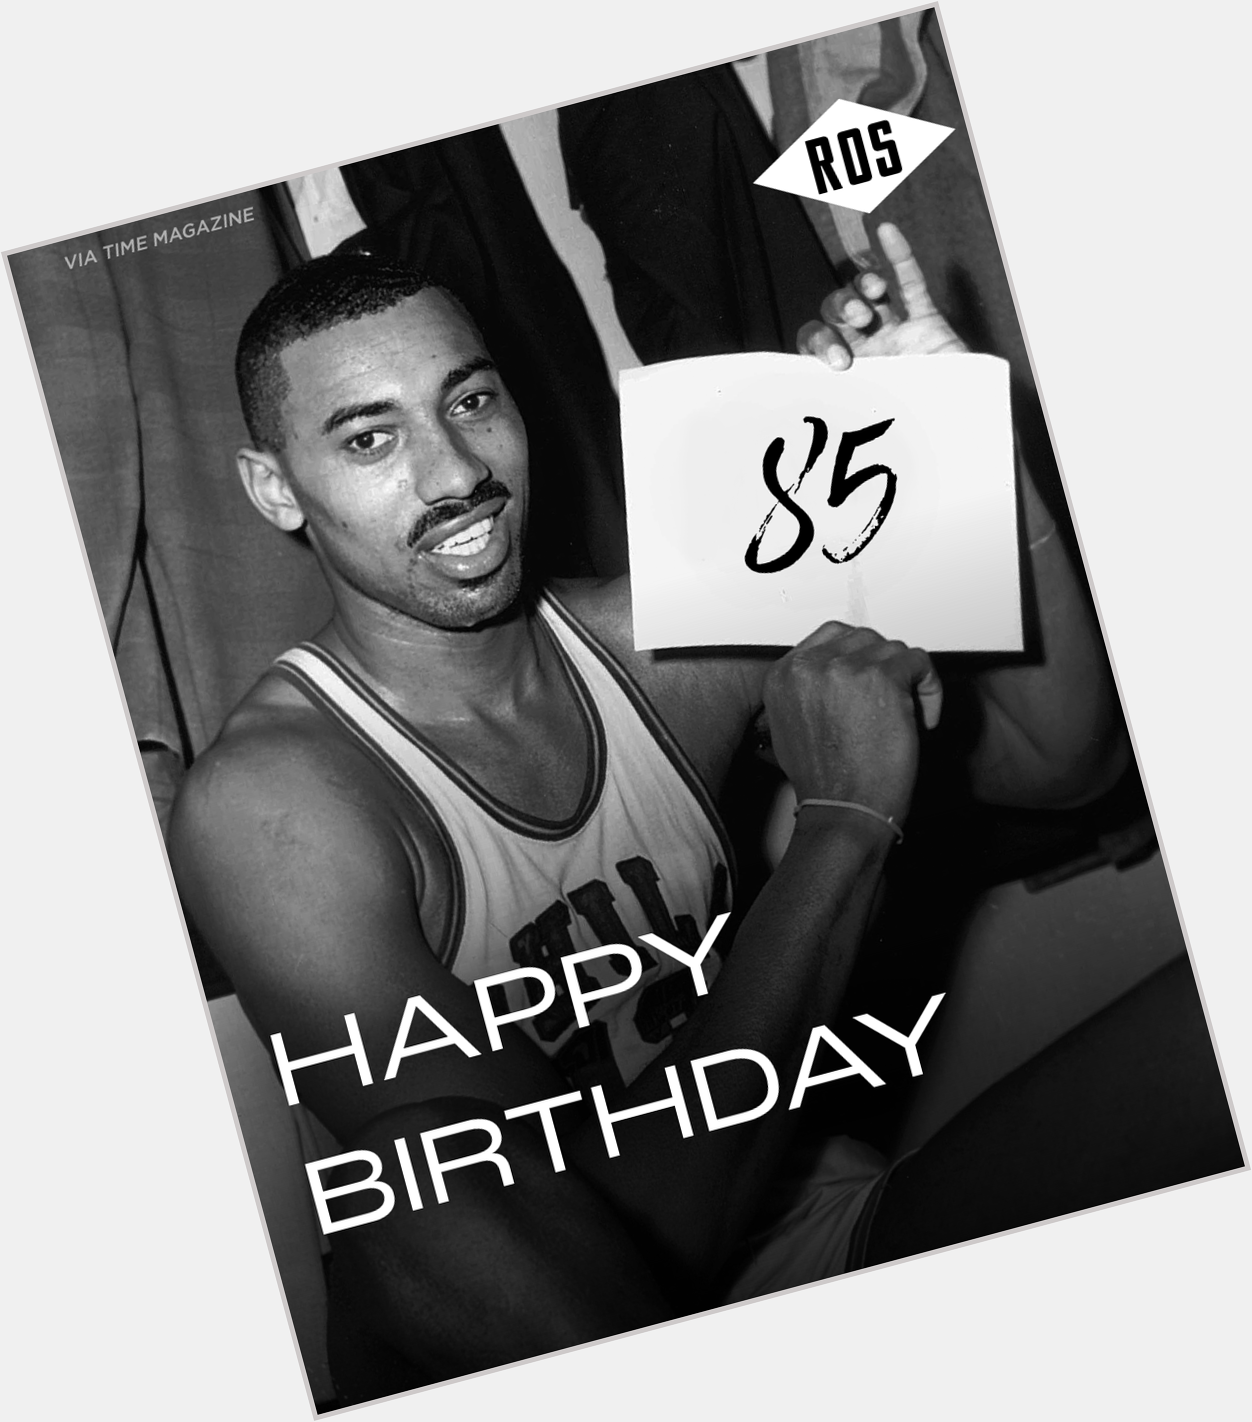 Happy Birthday to the legend, Wilt Chamberlain.

Today would have been his 85th birthday. 